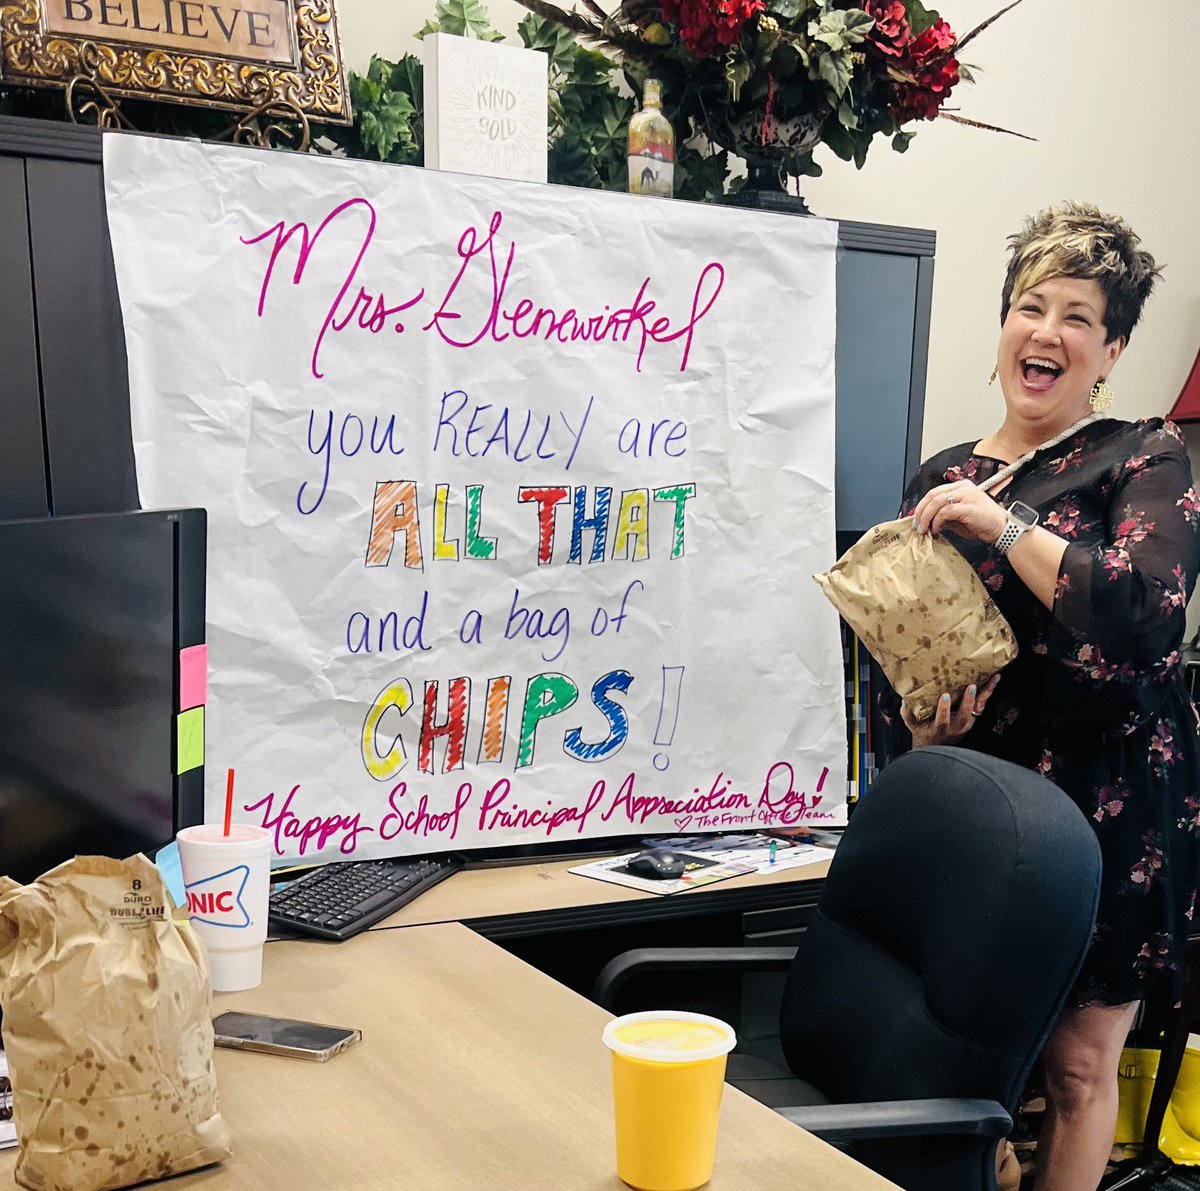 @nmglenewinkel you really are ALL THAT and a bag of chips! Happy School Principal Appreciation Day! @TISDGOES